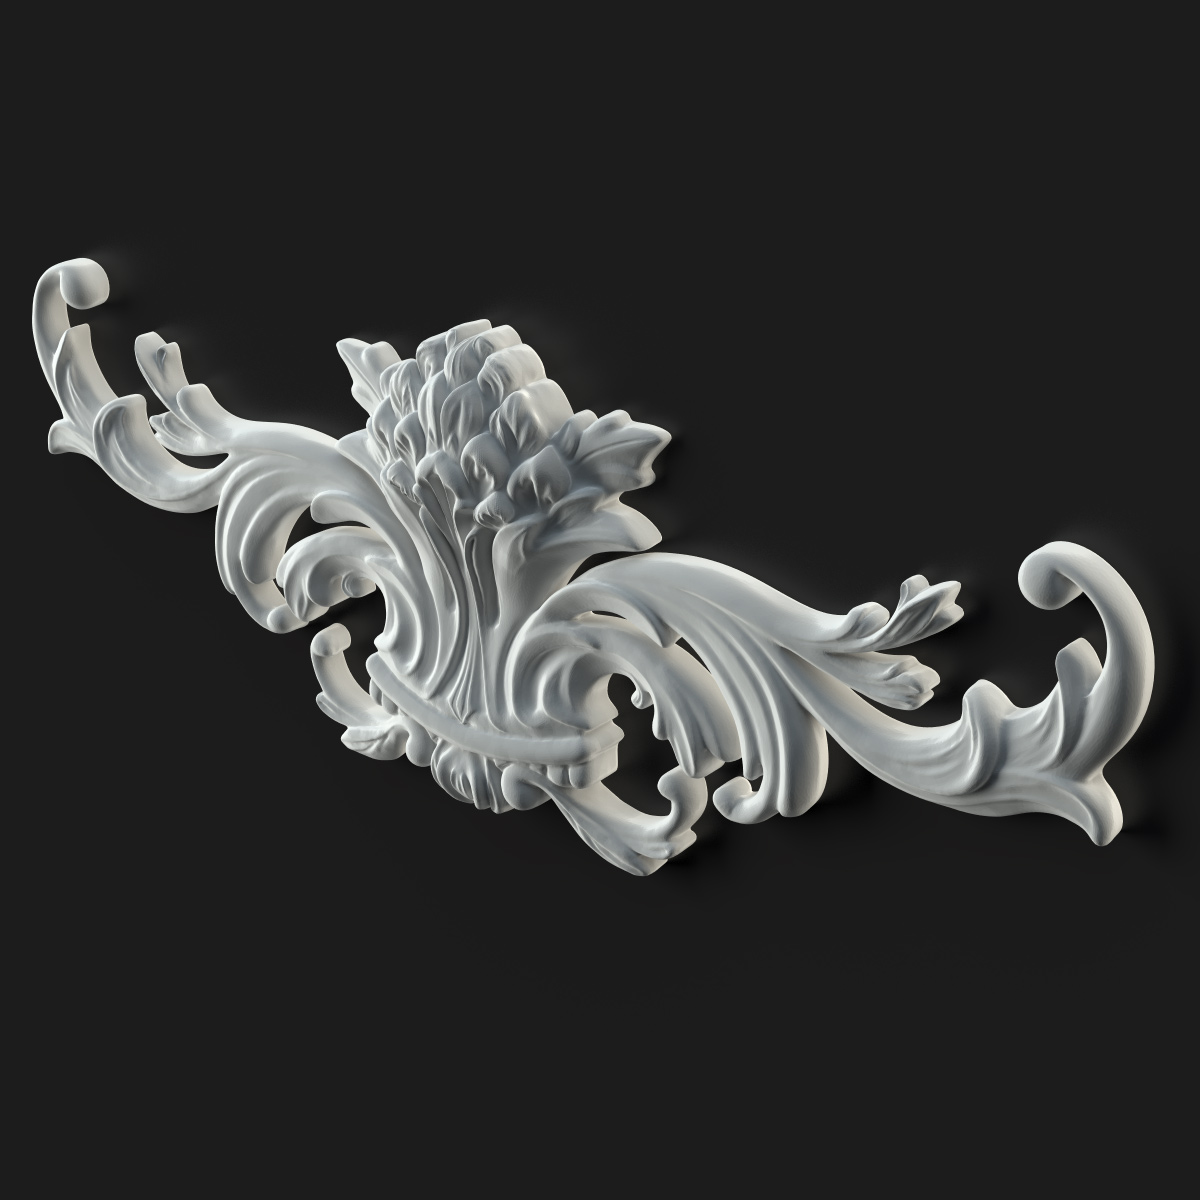 Digital Sculpting of Complex Furniture Elements. Creation 3D Models for Prototyping and Production.